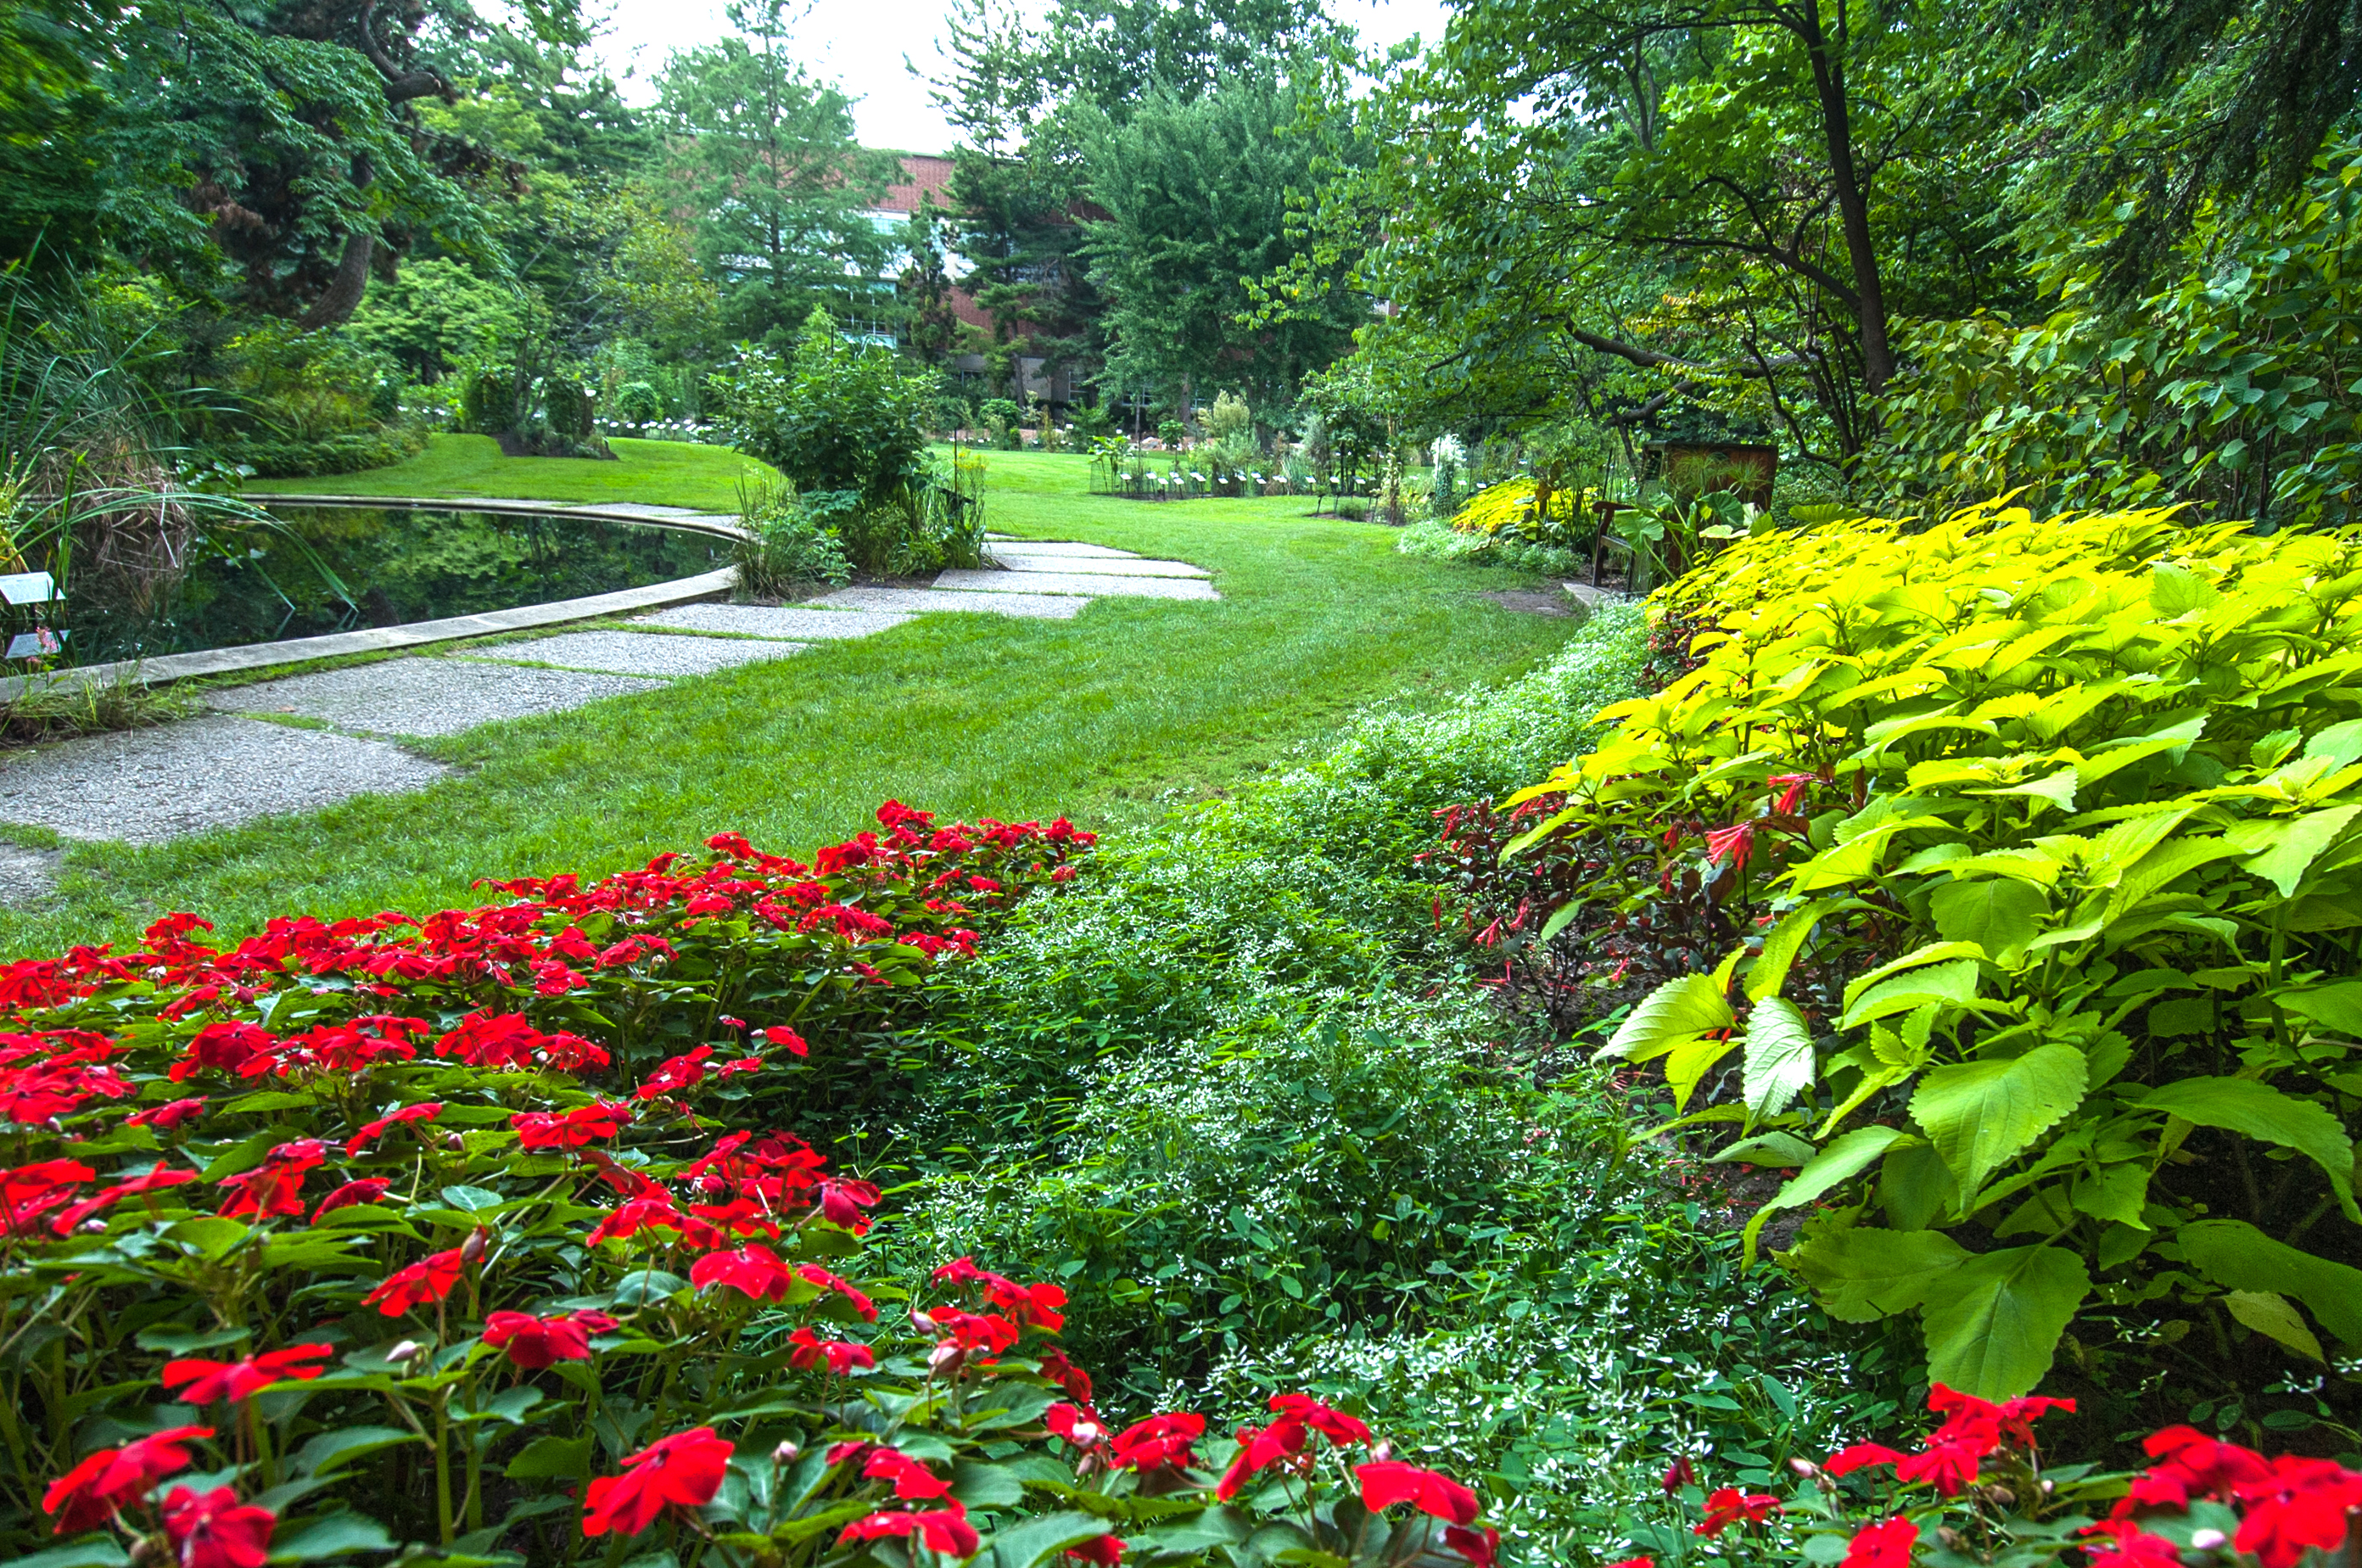 Beal Botanical Garden in the spring or summer. Photo courtesy of Michigan State University